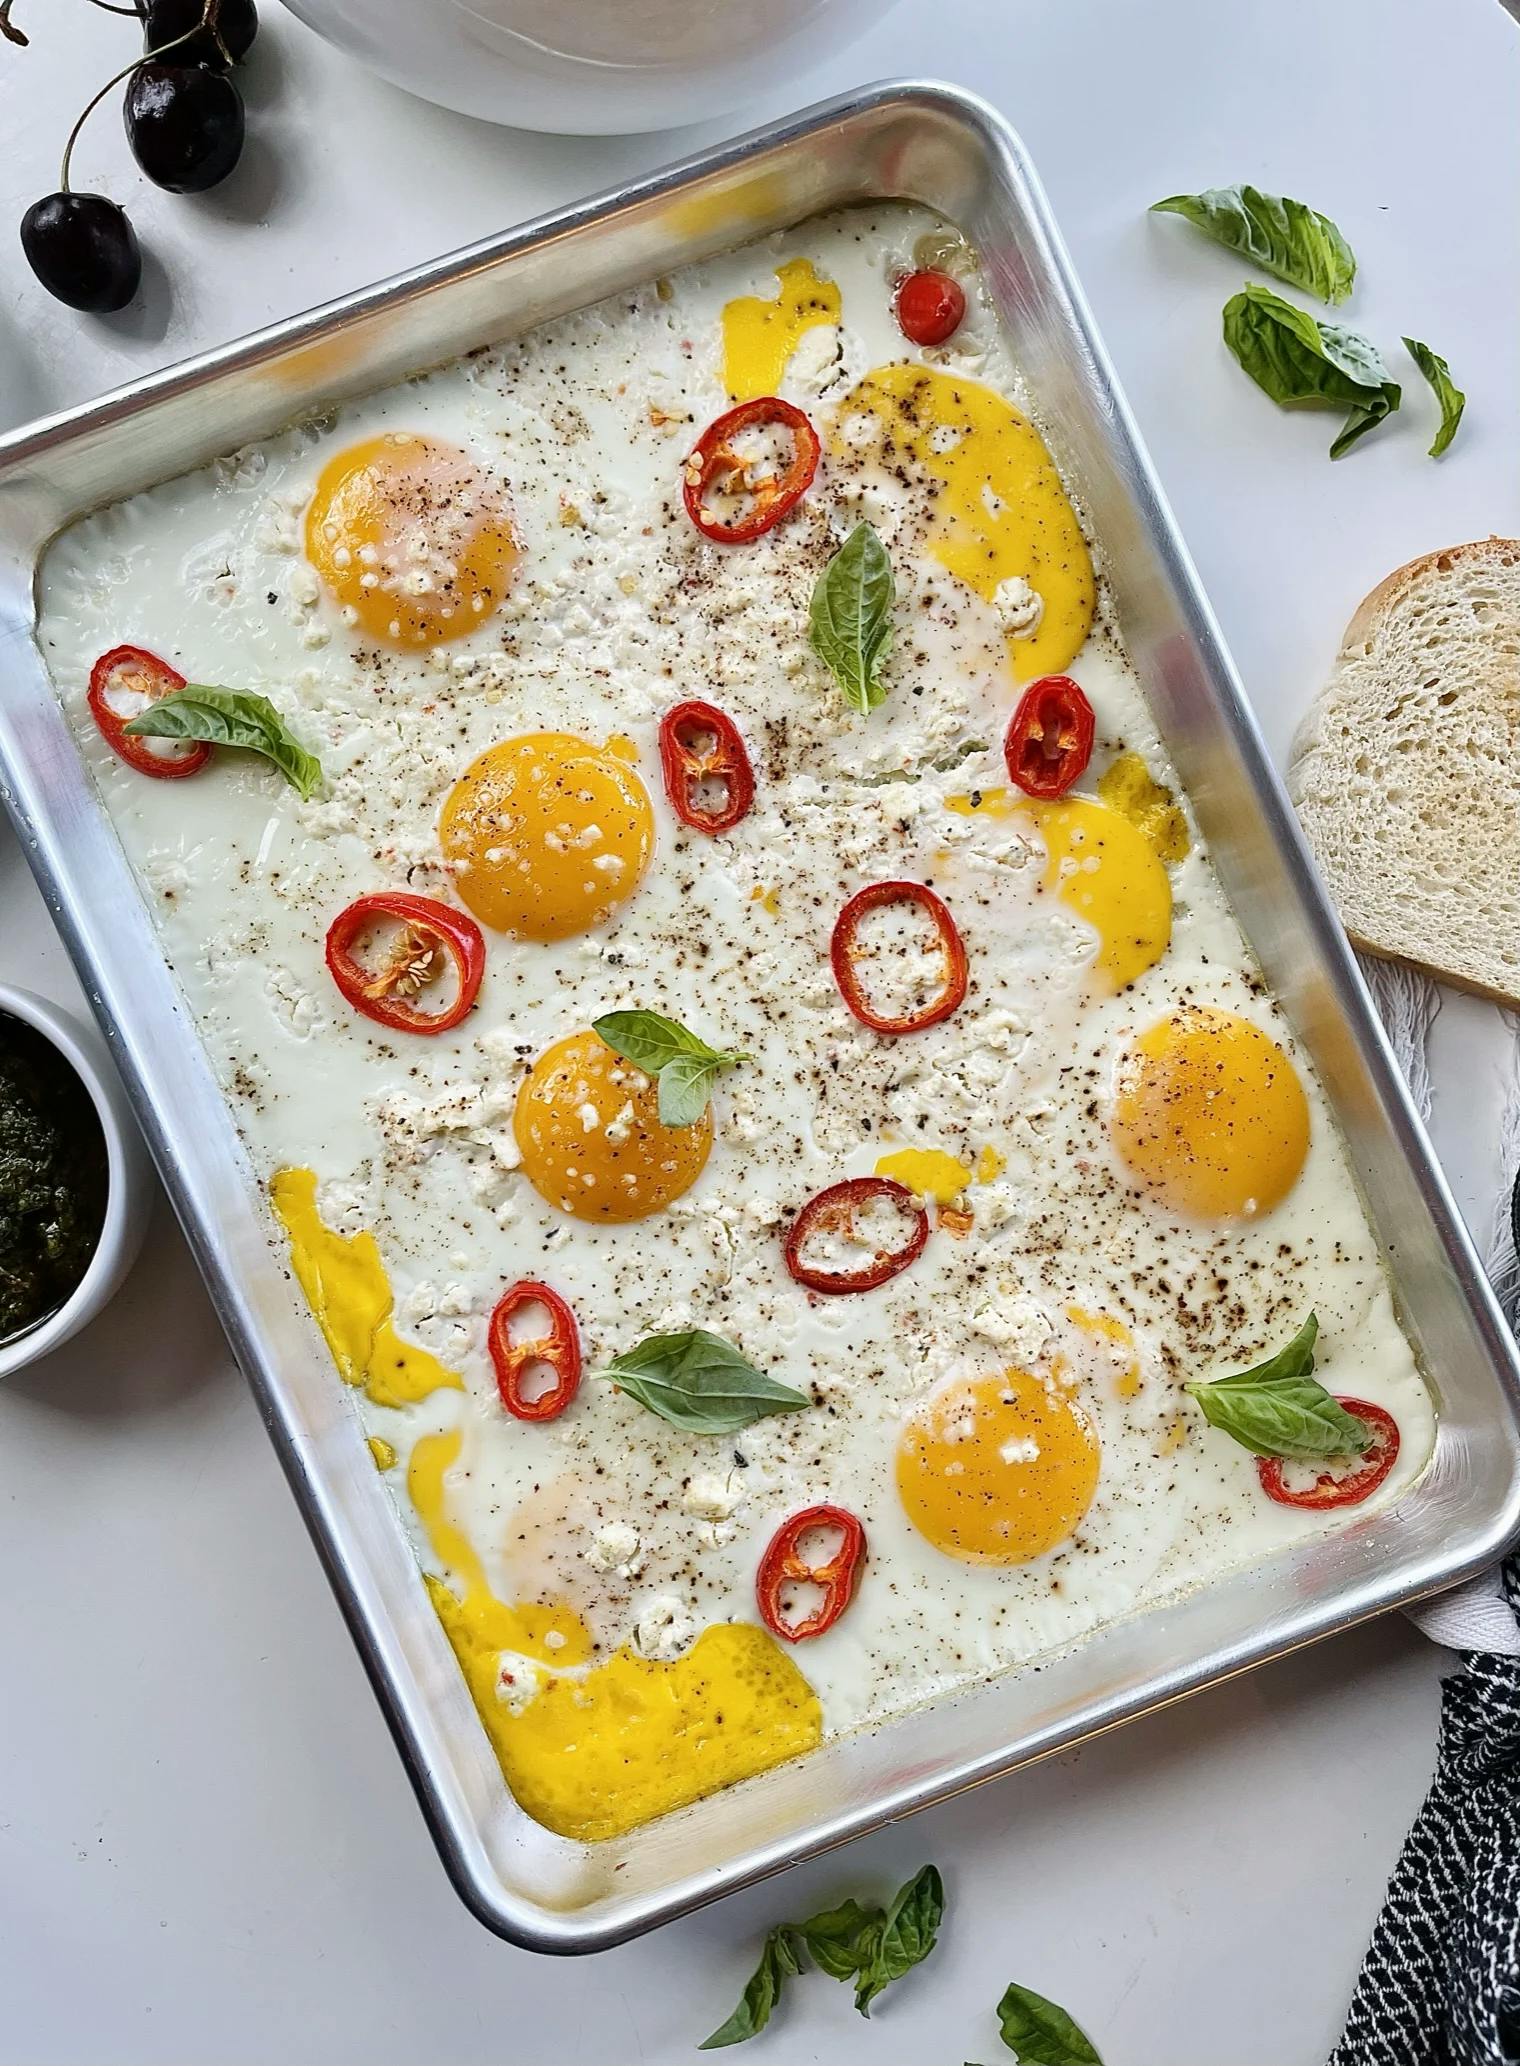 Picture for Baked Sheet Pan Eggs